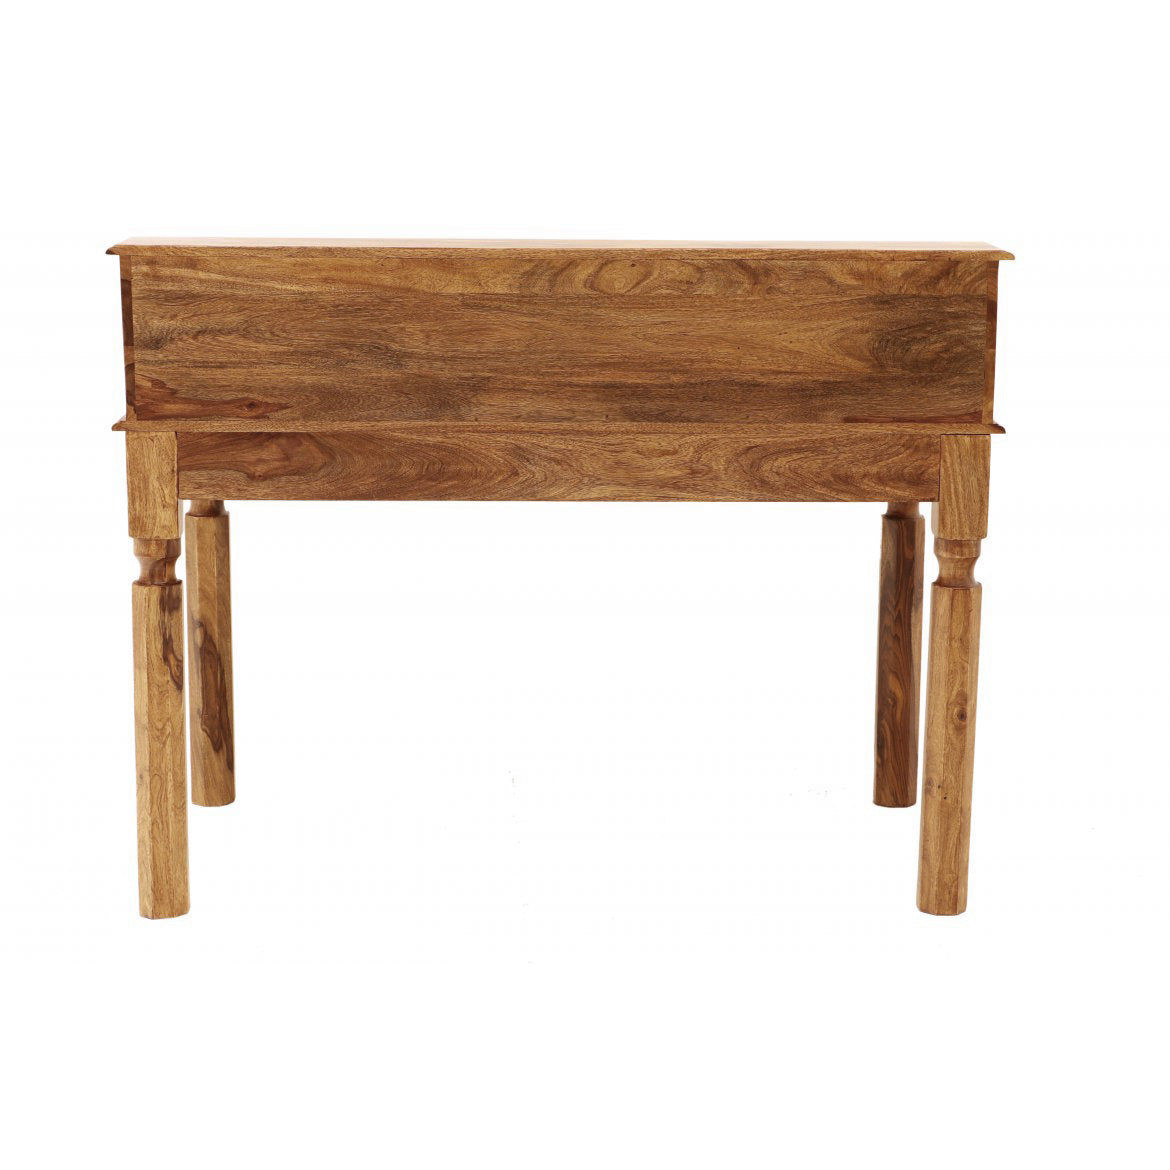 Study Table Wooden —  Aster